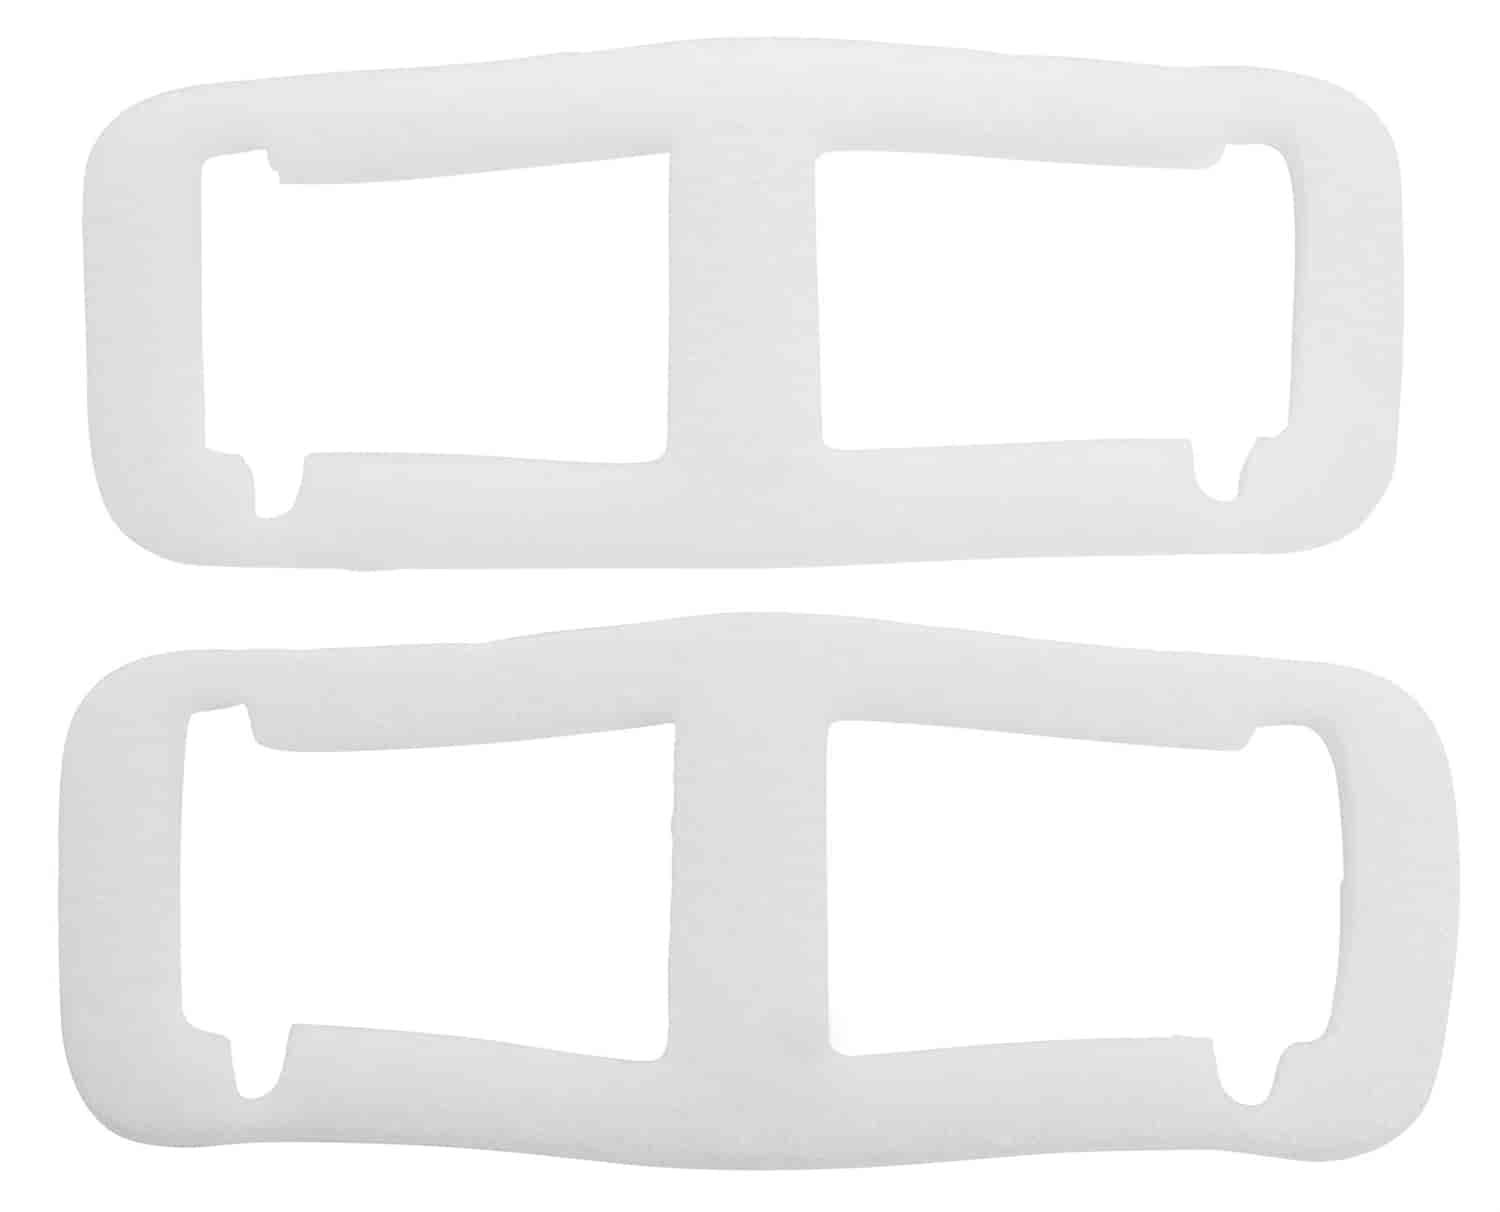 Taillamp Housing Gaskets 64 Plymouth Fury